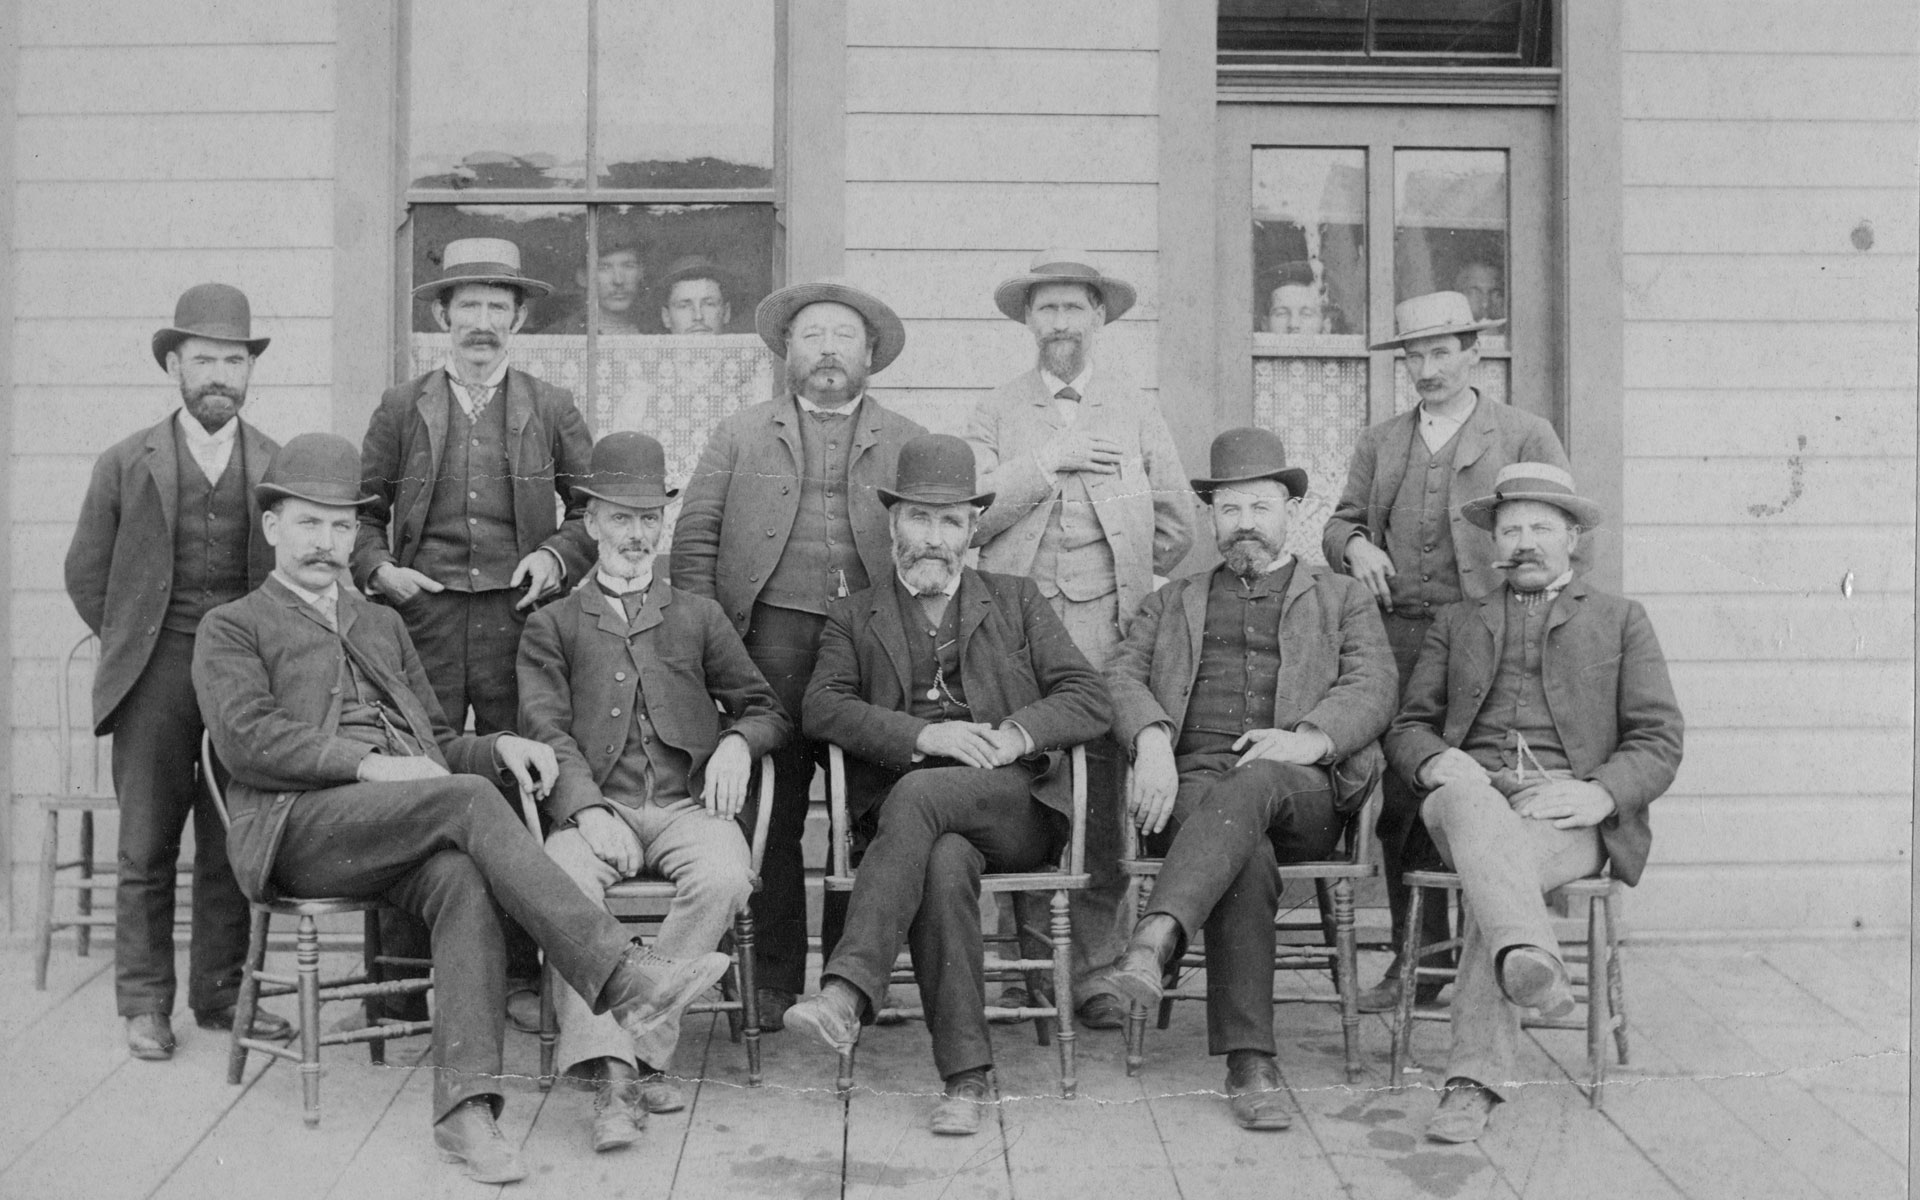 Group portrait with 5 men seated and 5 men standing behind. Four additional people are peaking out the windows of the building behind the men.